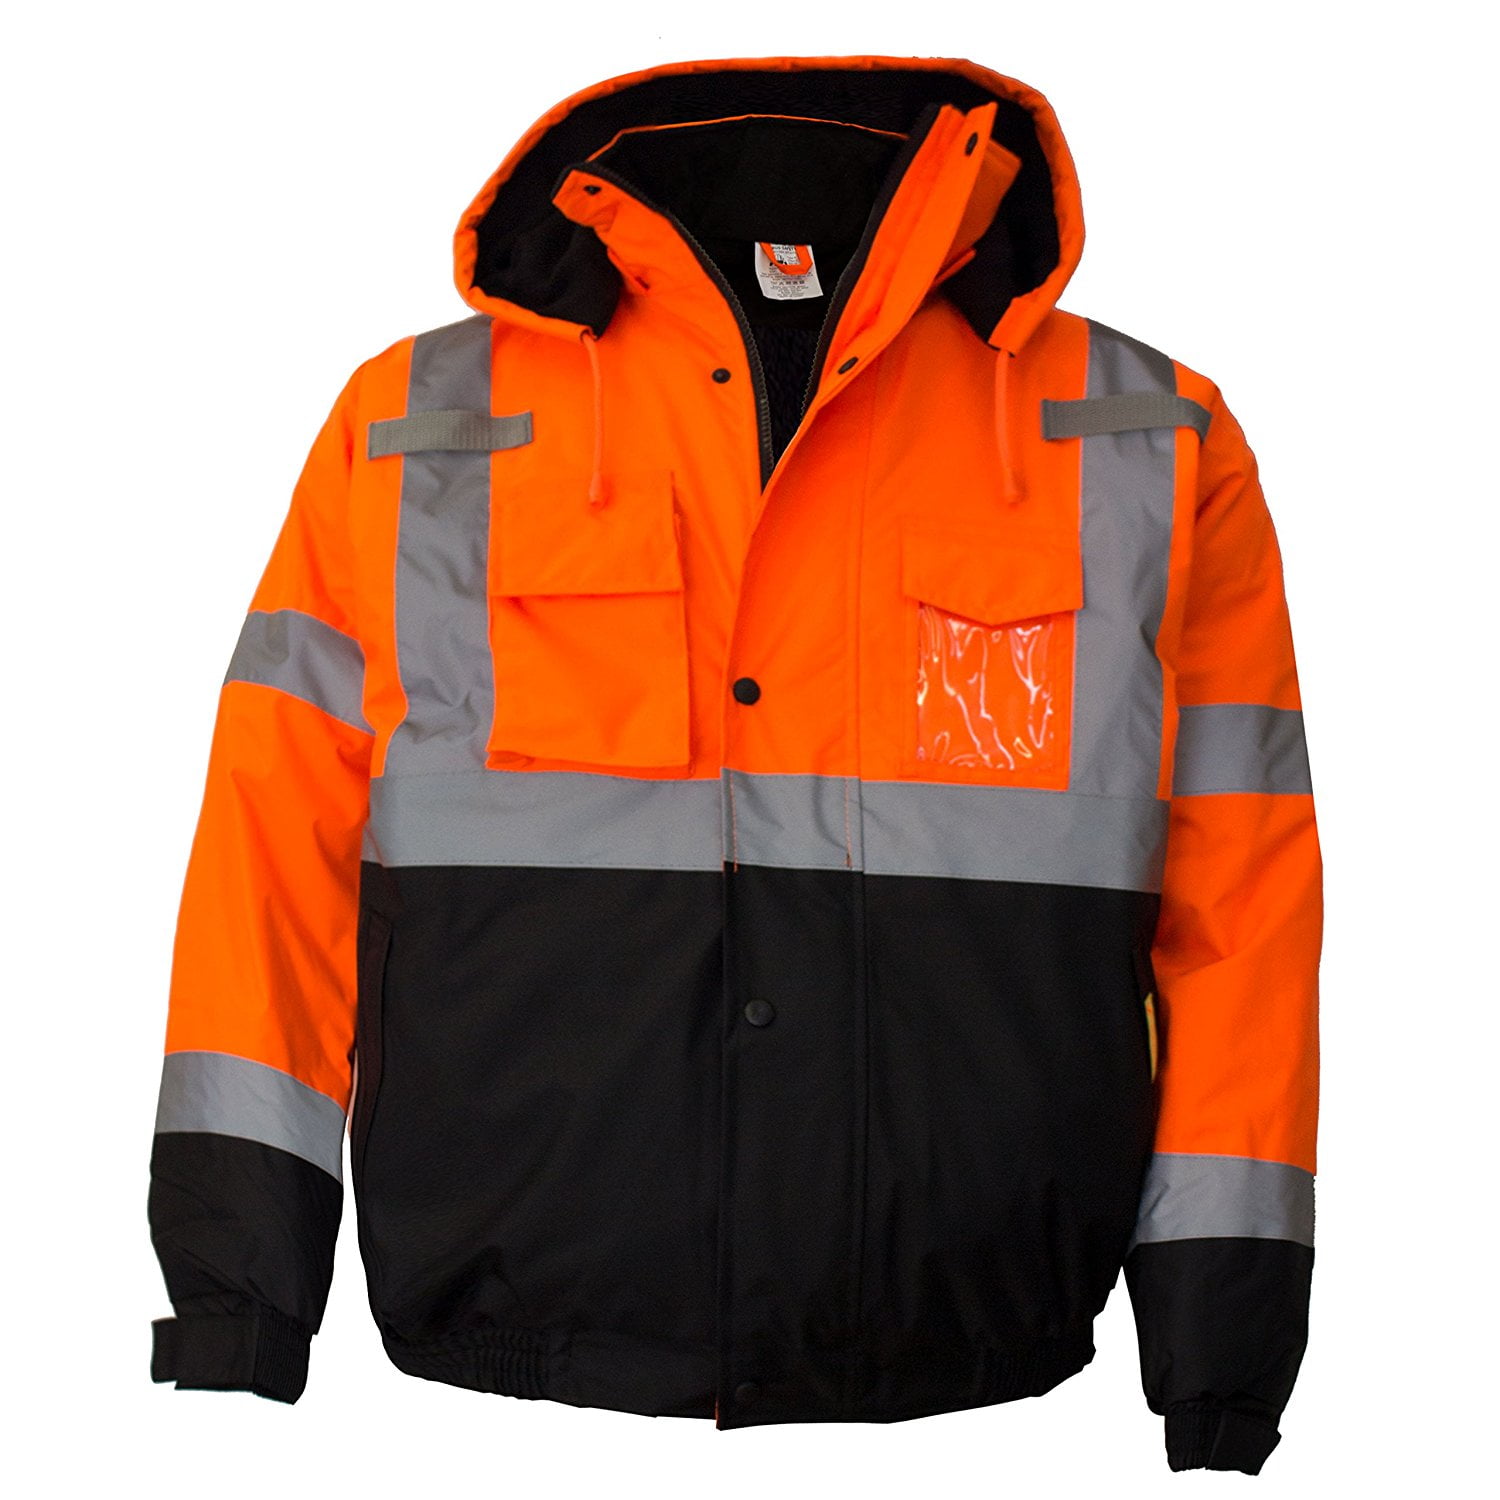 JORESTECH 2-in-1 Ripstop Safety Bomber Jacket Waterproof Reflective High Visibility with Detachable Hood and Fleece Liner Orange ANSI Class 3 Level 2 Type R JK-02 2XL